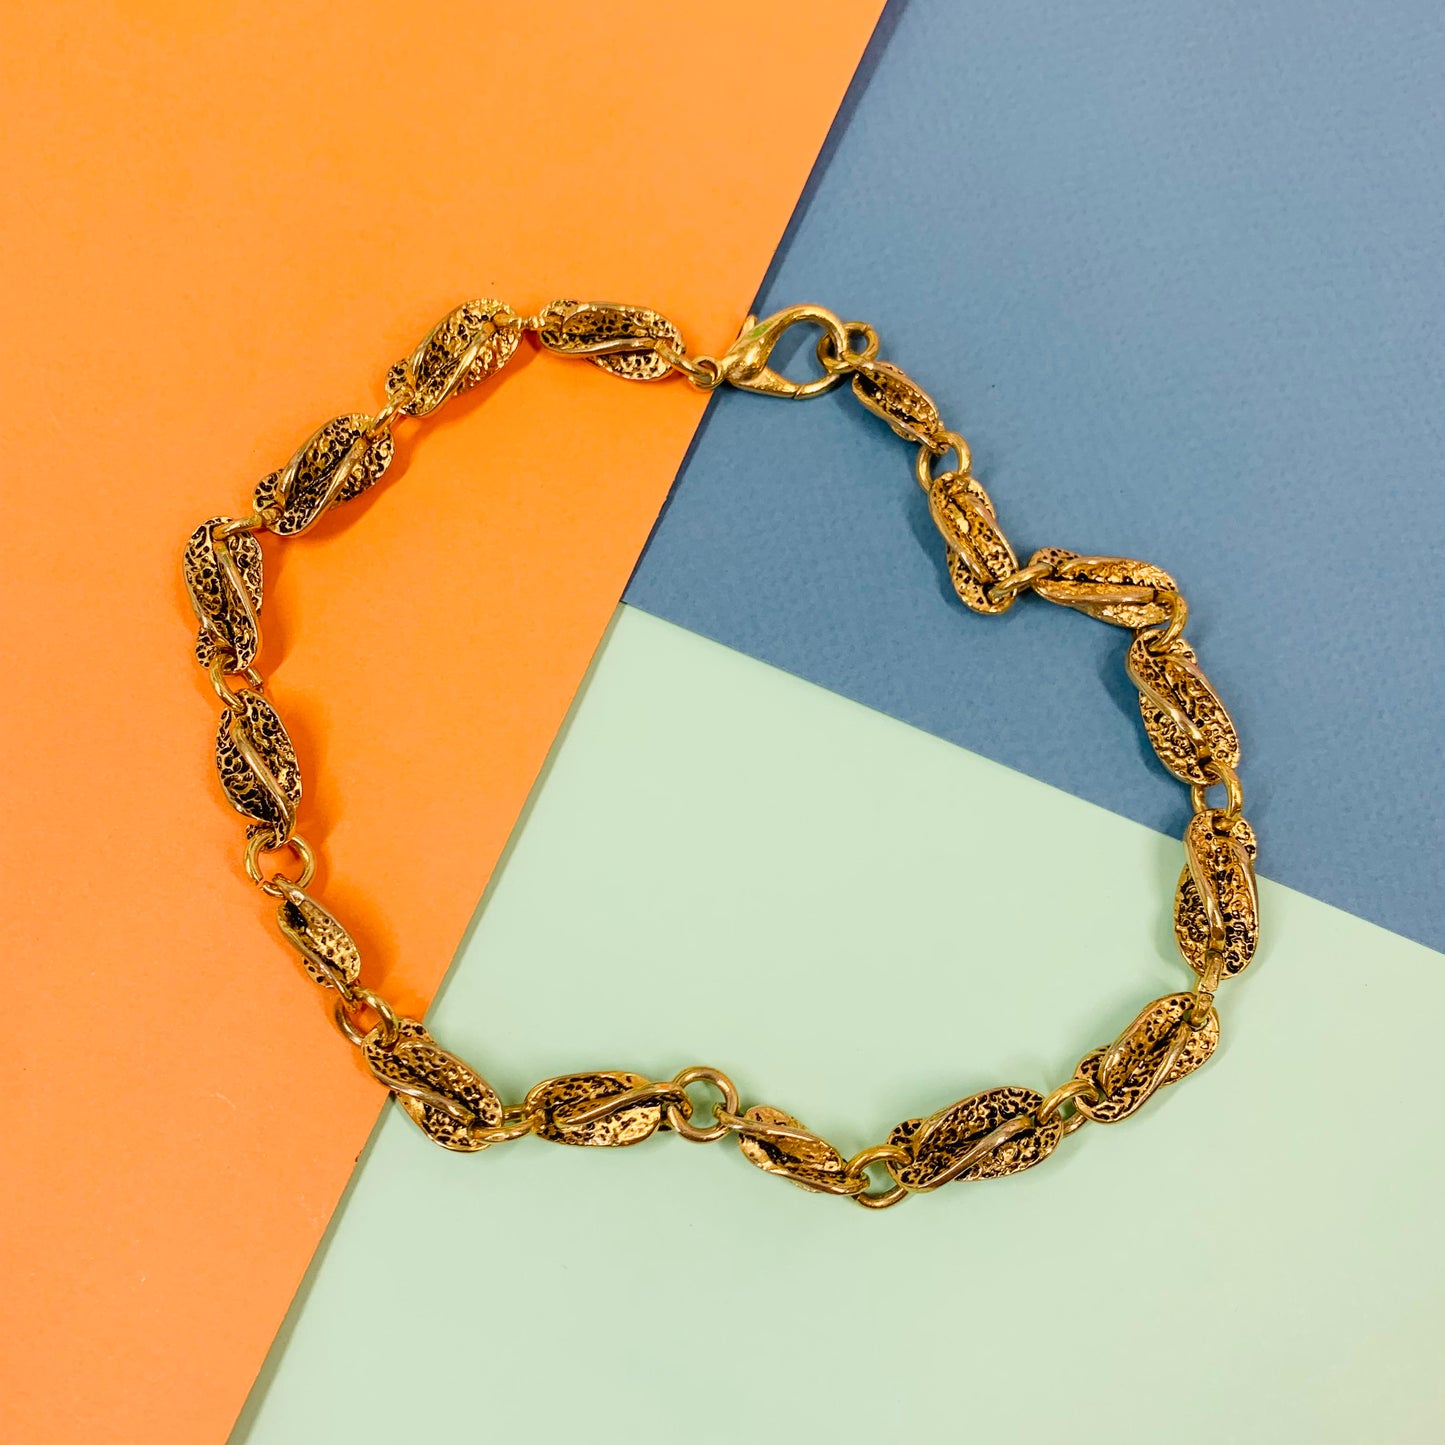 1970s Coro triple plated gold necklace with nugget links